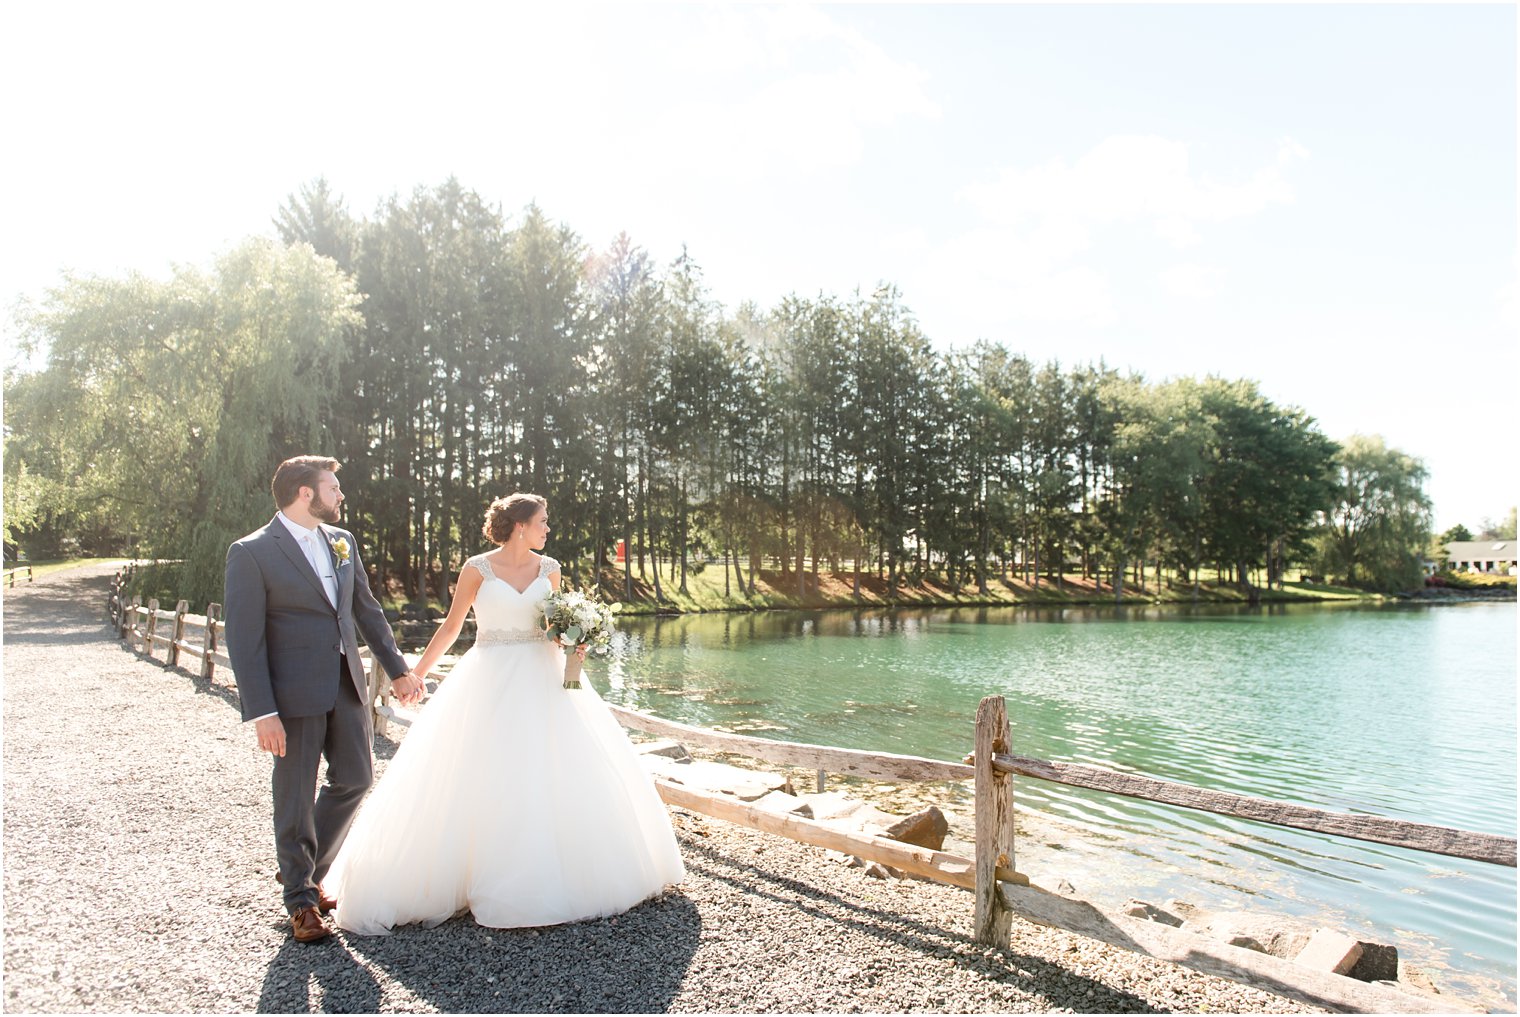 Bride and Groom photo at Windows on the Water at Frogbridge Wedding